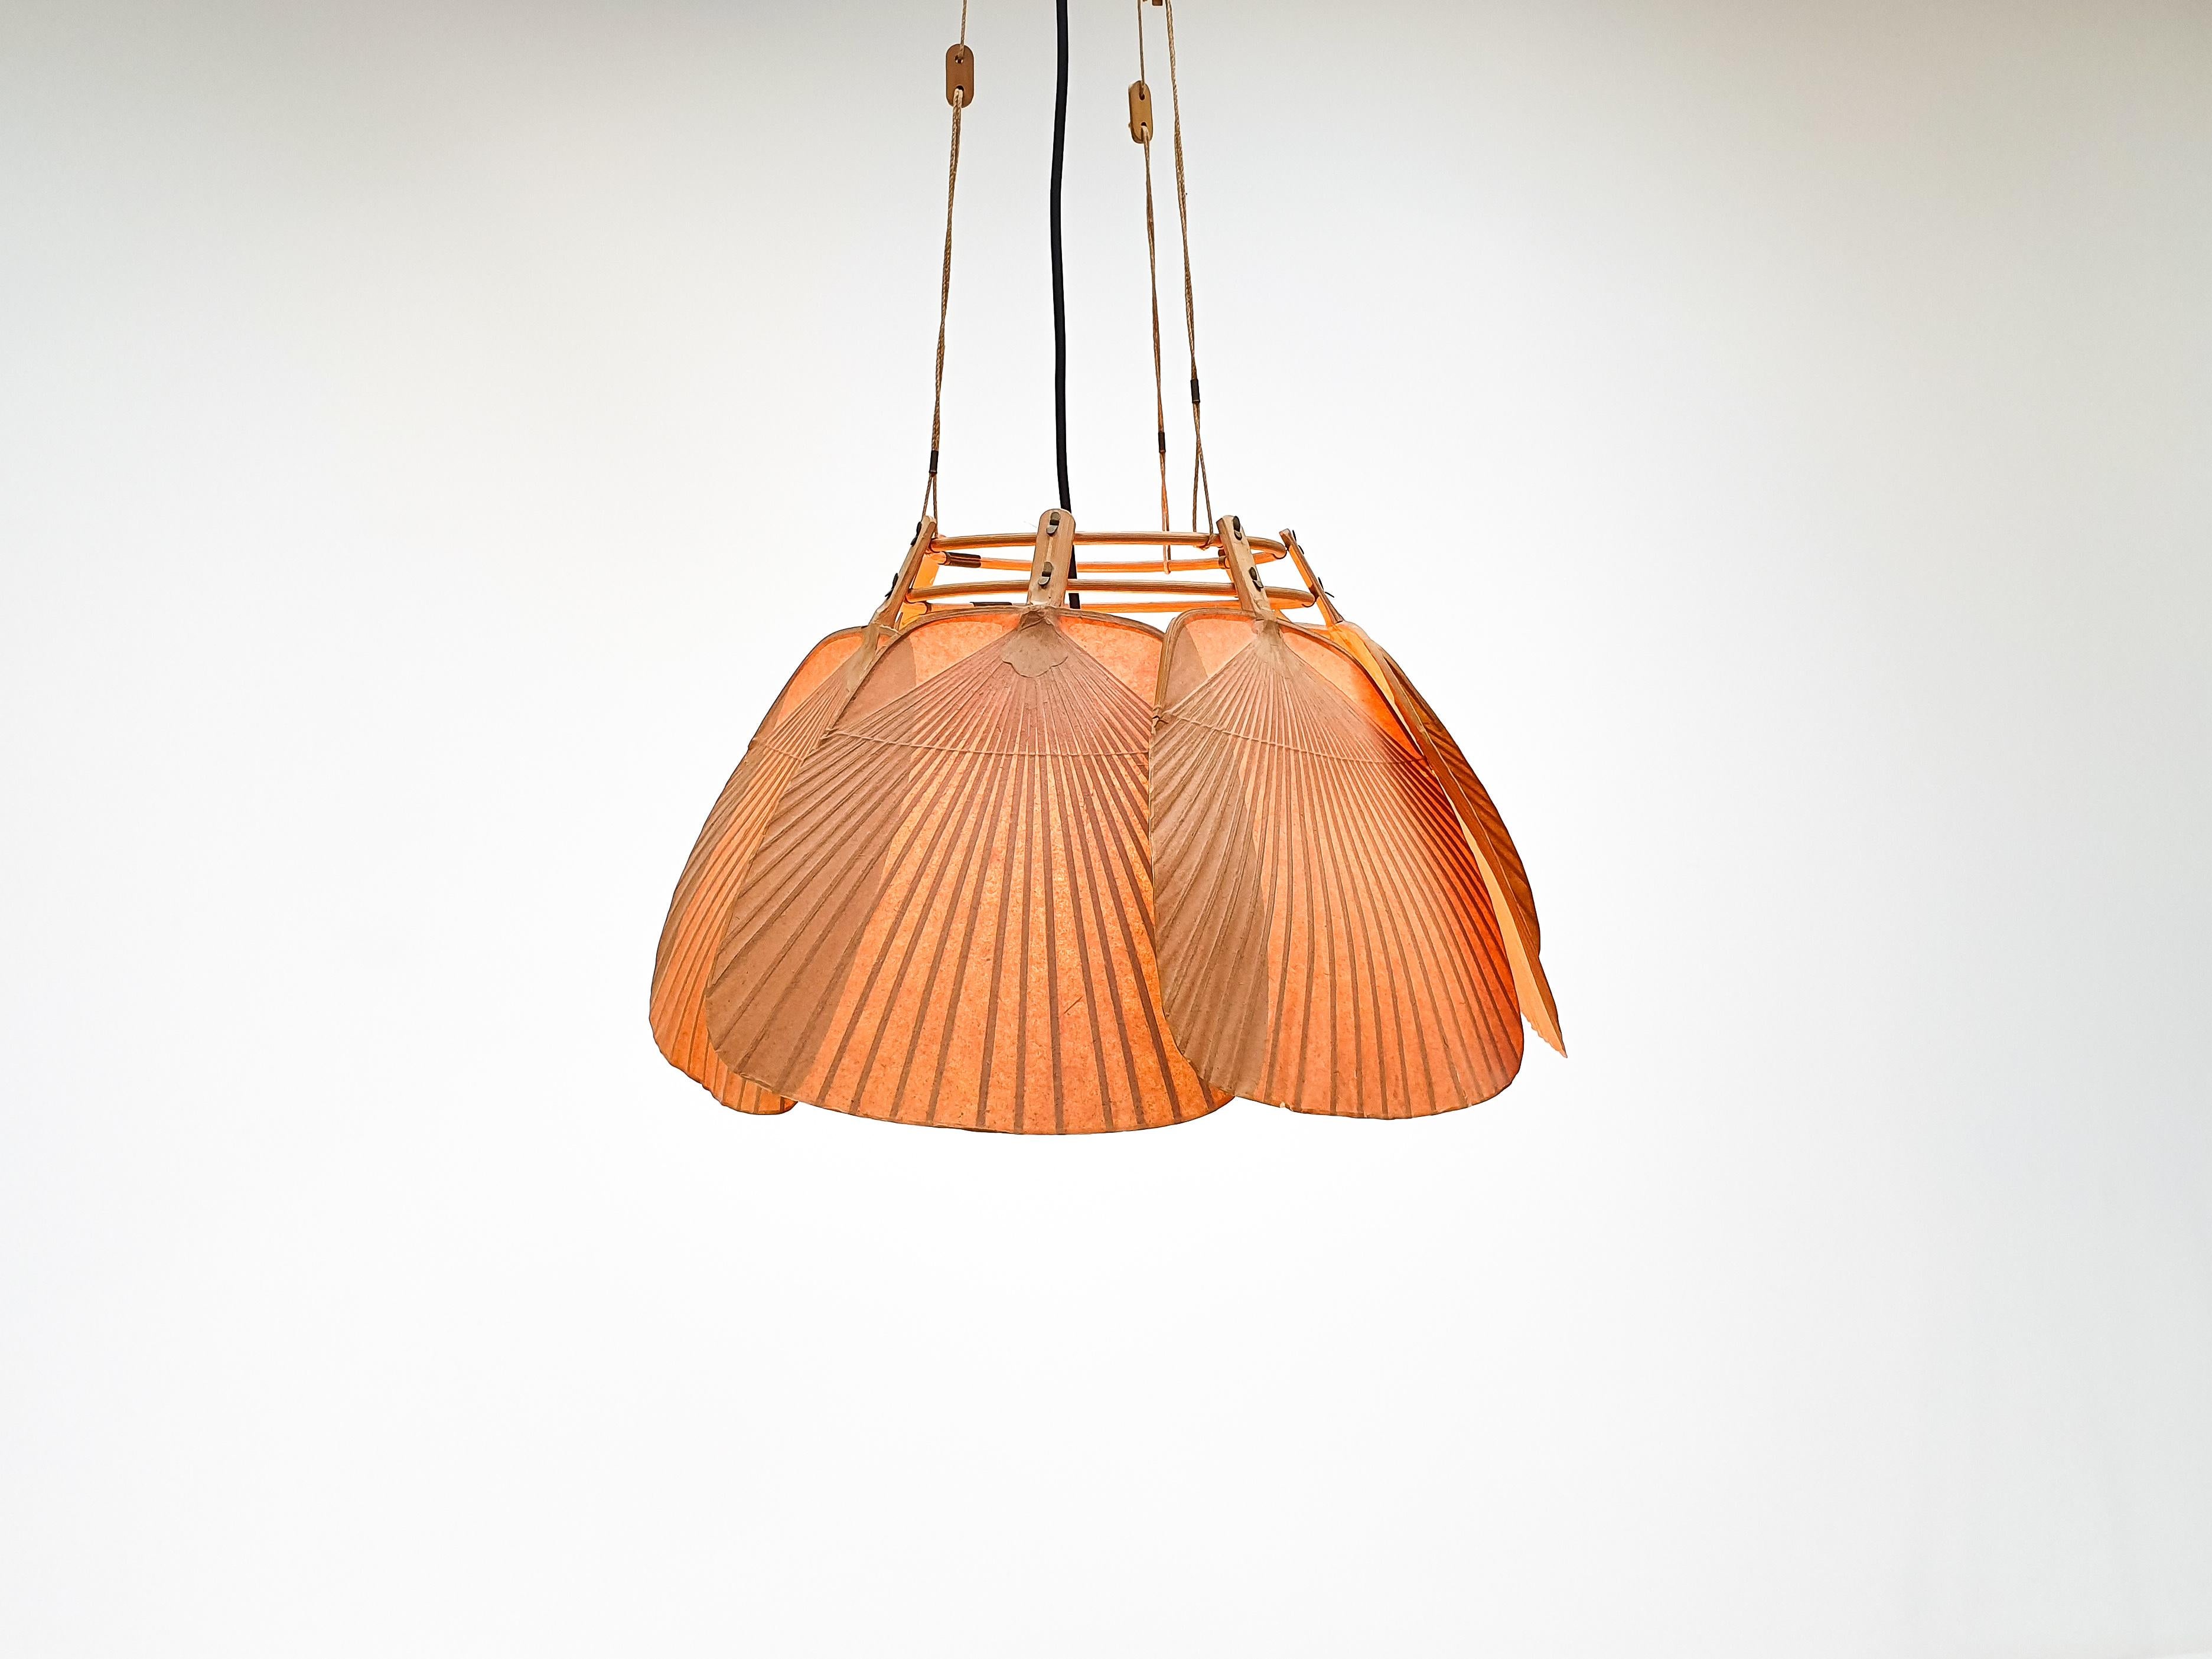 An ‘Uchiwa’ chandelier by Ingo Maurer created for M design during the 1970s. 

Uchiwa lamps were handmade from bamboo and Japanese rice paper and the designs drew inspiration from traditional Japanese fans.

The fixture is adjustable in height